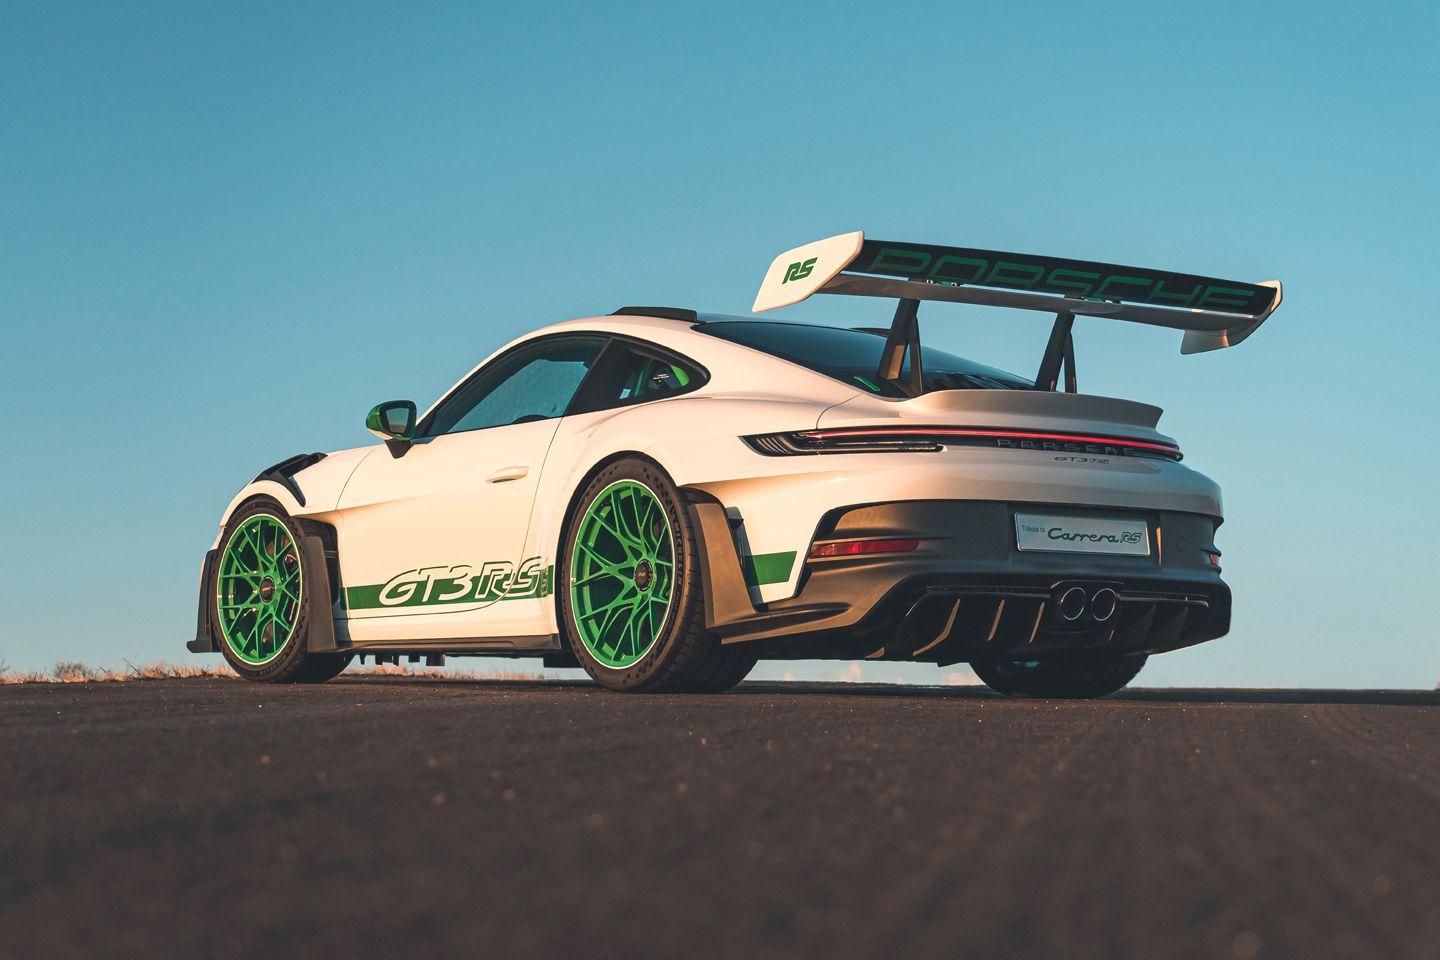 Driven! The Bonkers New Porsche 911 GT3 RS Must Be Taken on Faith